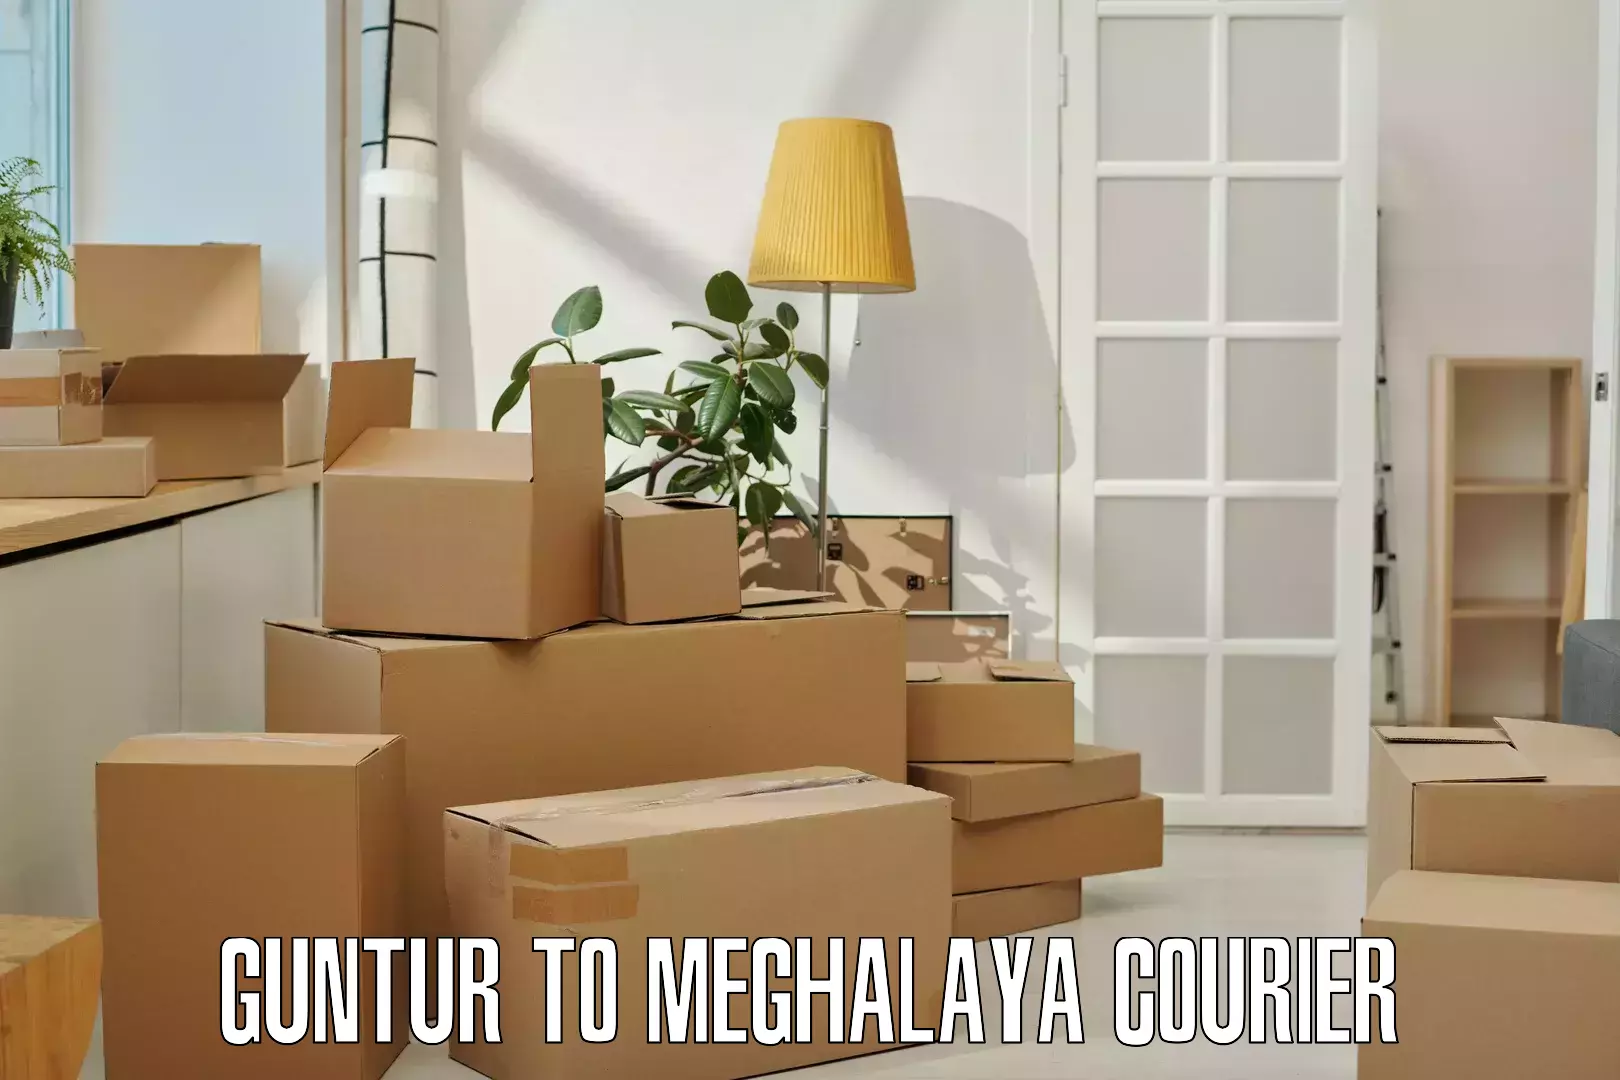 State-of-the-art courier technology Guntur to Meghalaya